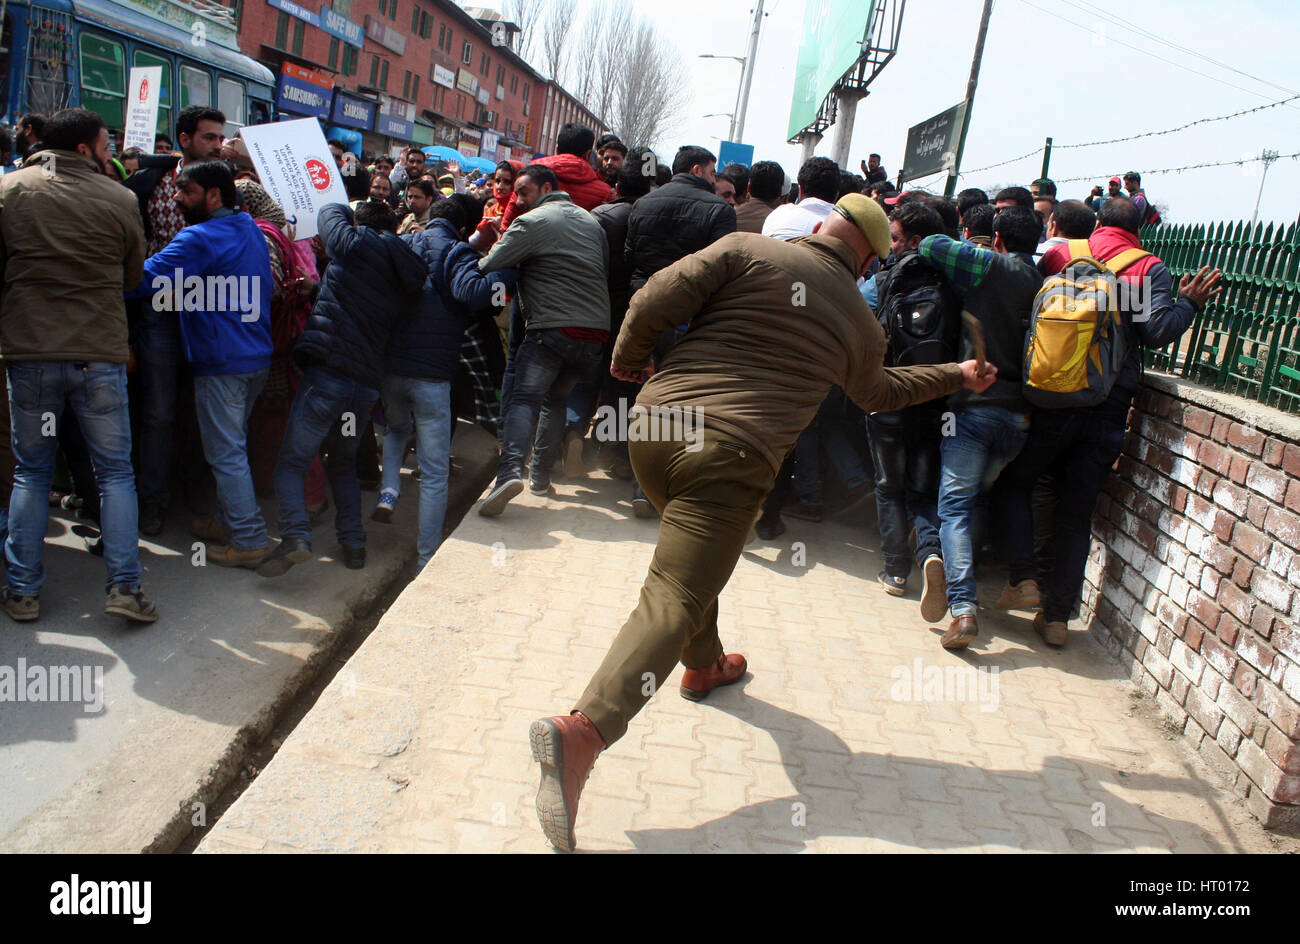 Srinagar, Indian Administered Kashmir: 06 .March.Indian police caning charge Employees of National Rural Health Mission(NRHM), during a protest demonstration against their demands. Credit: sofi suhail/Alamy Live News Stock Photo